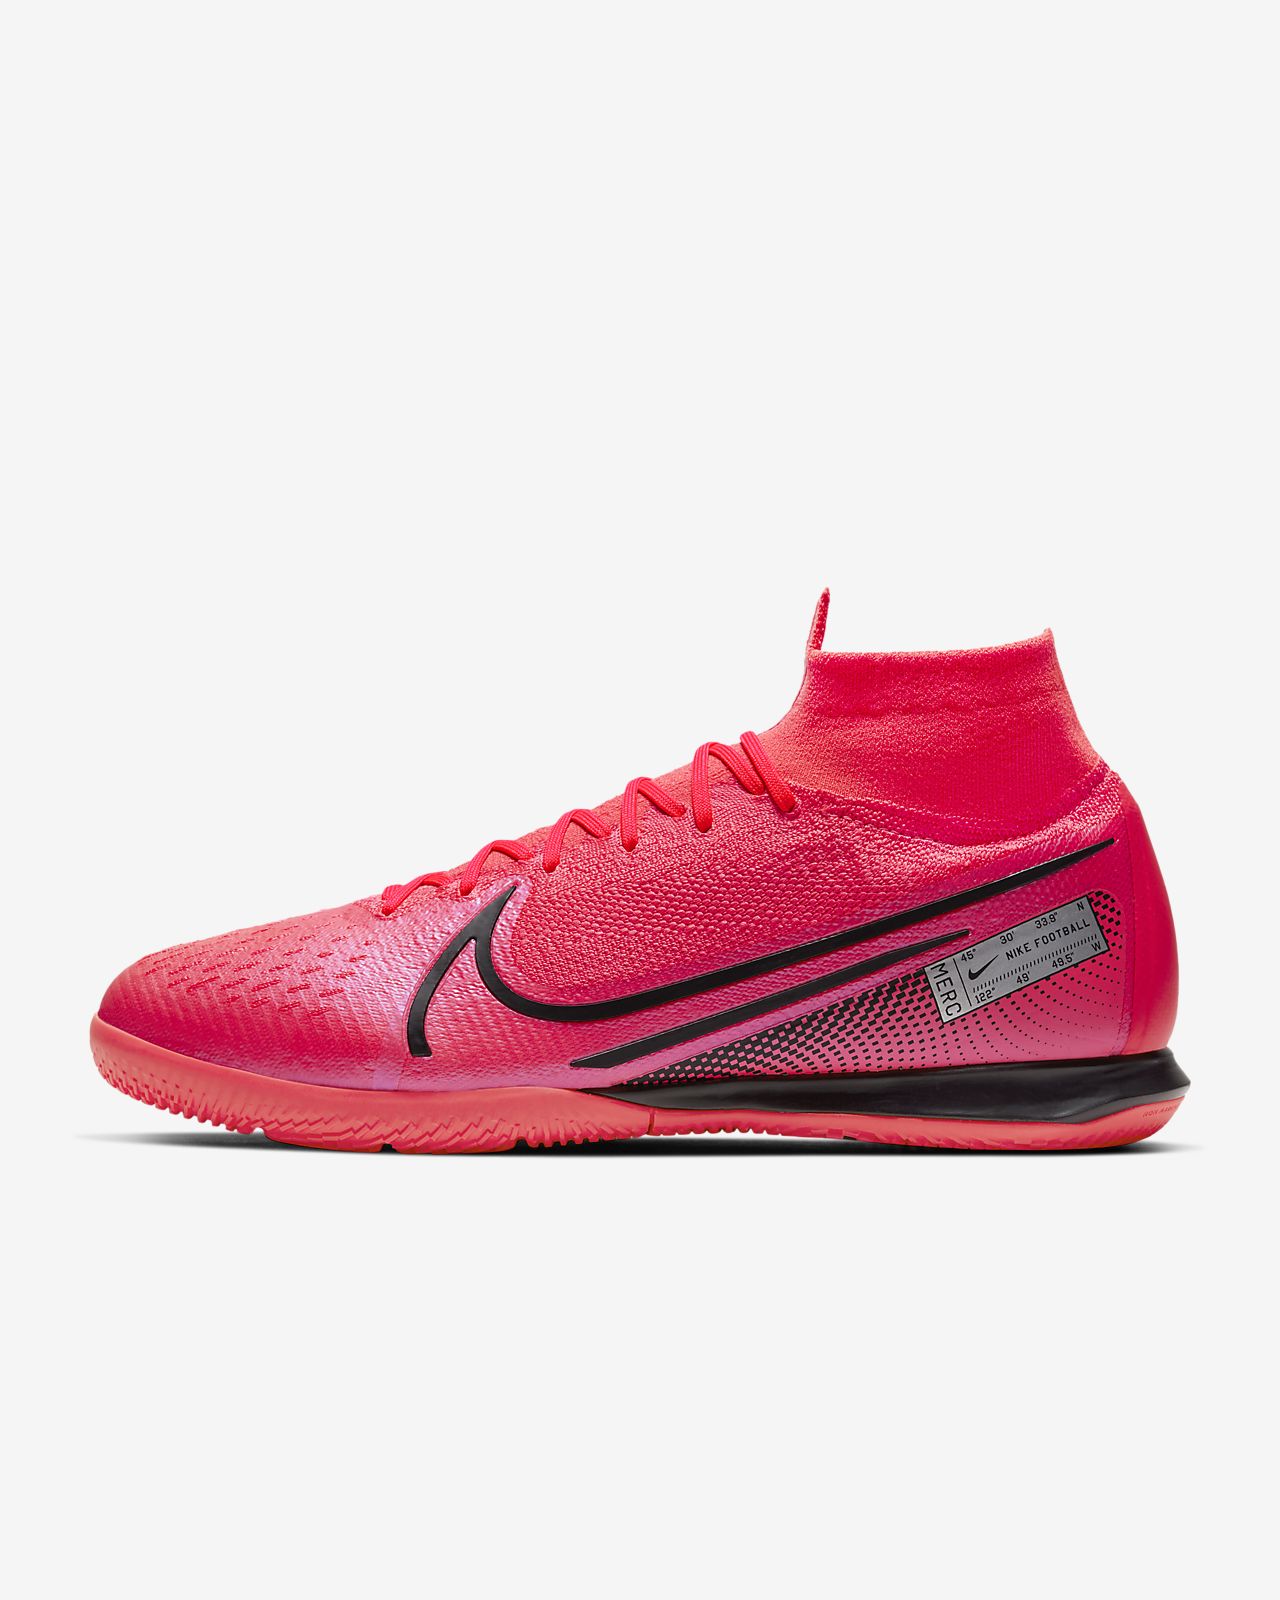 Buy Nike Cr7 Superfly 6 Academy Sg pro Sale Mens Light Red.